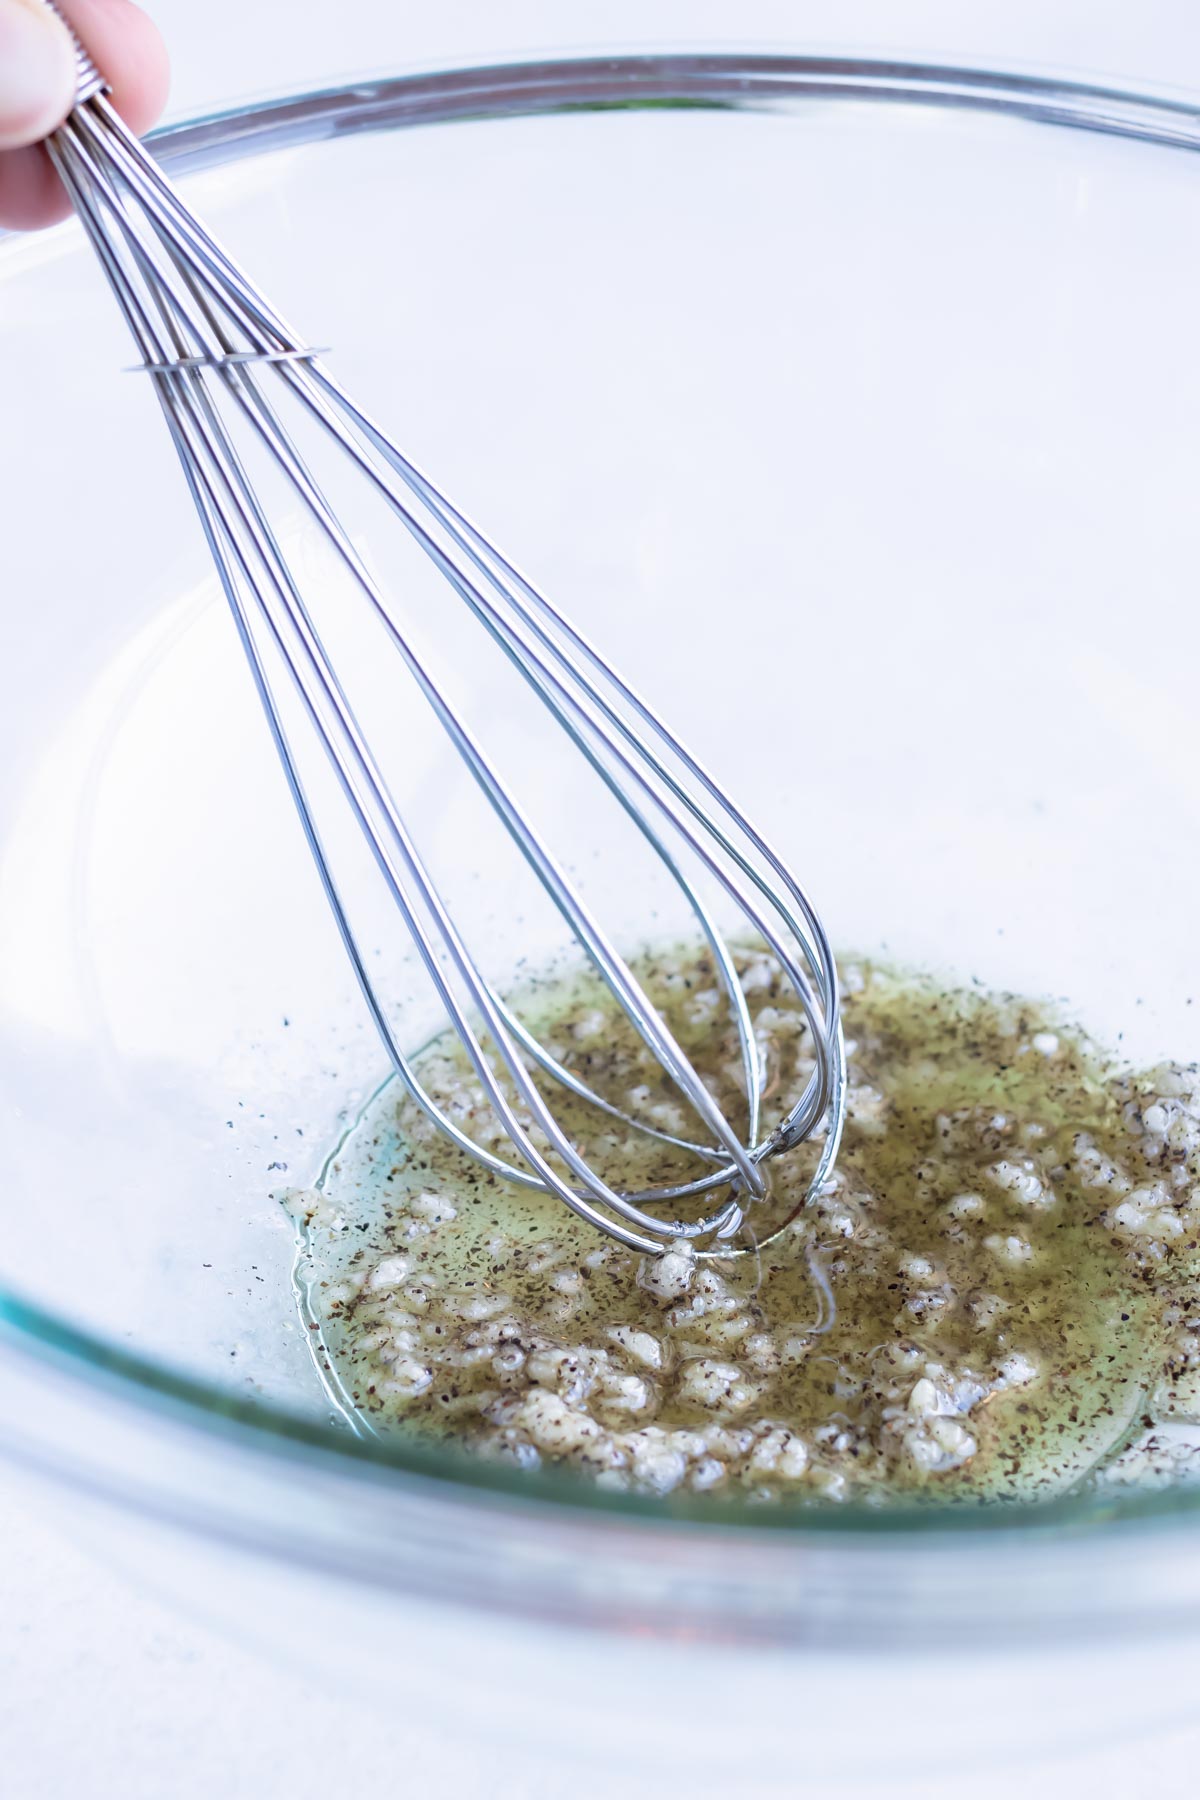 Oil, fresh garlic, and seasonings are whisked together in a glass bowl.